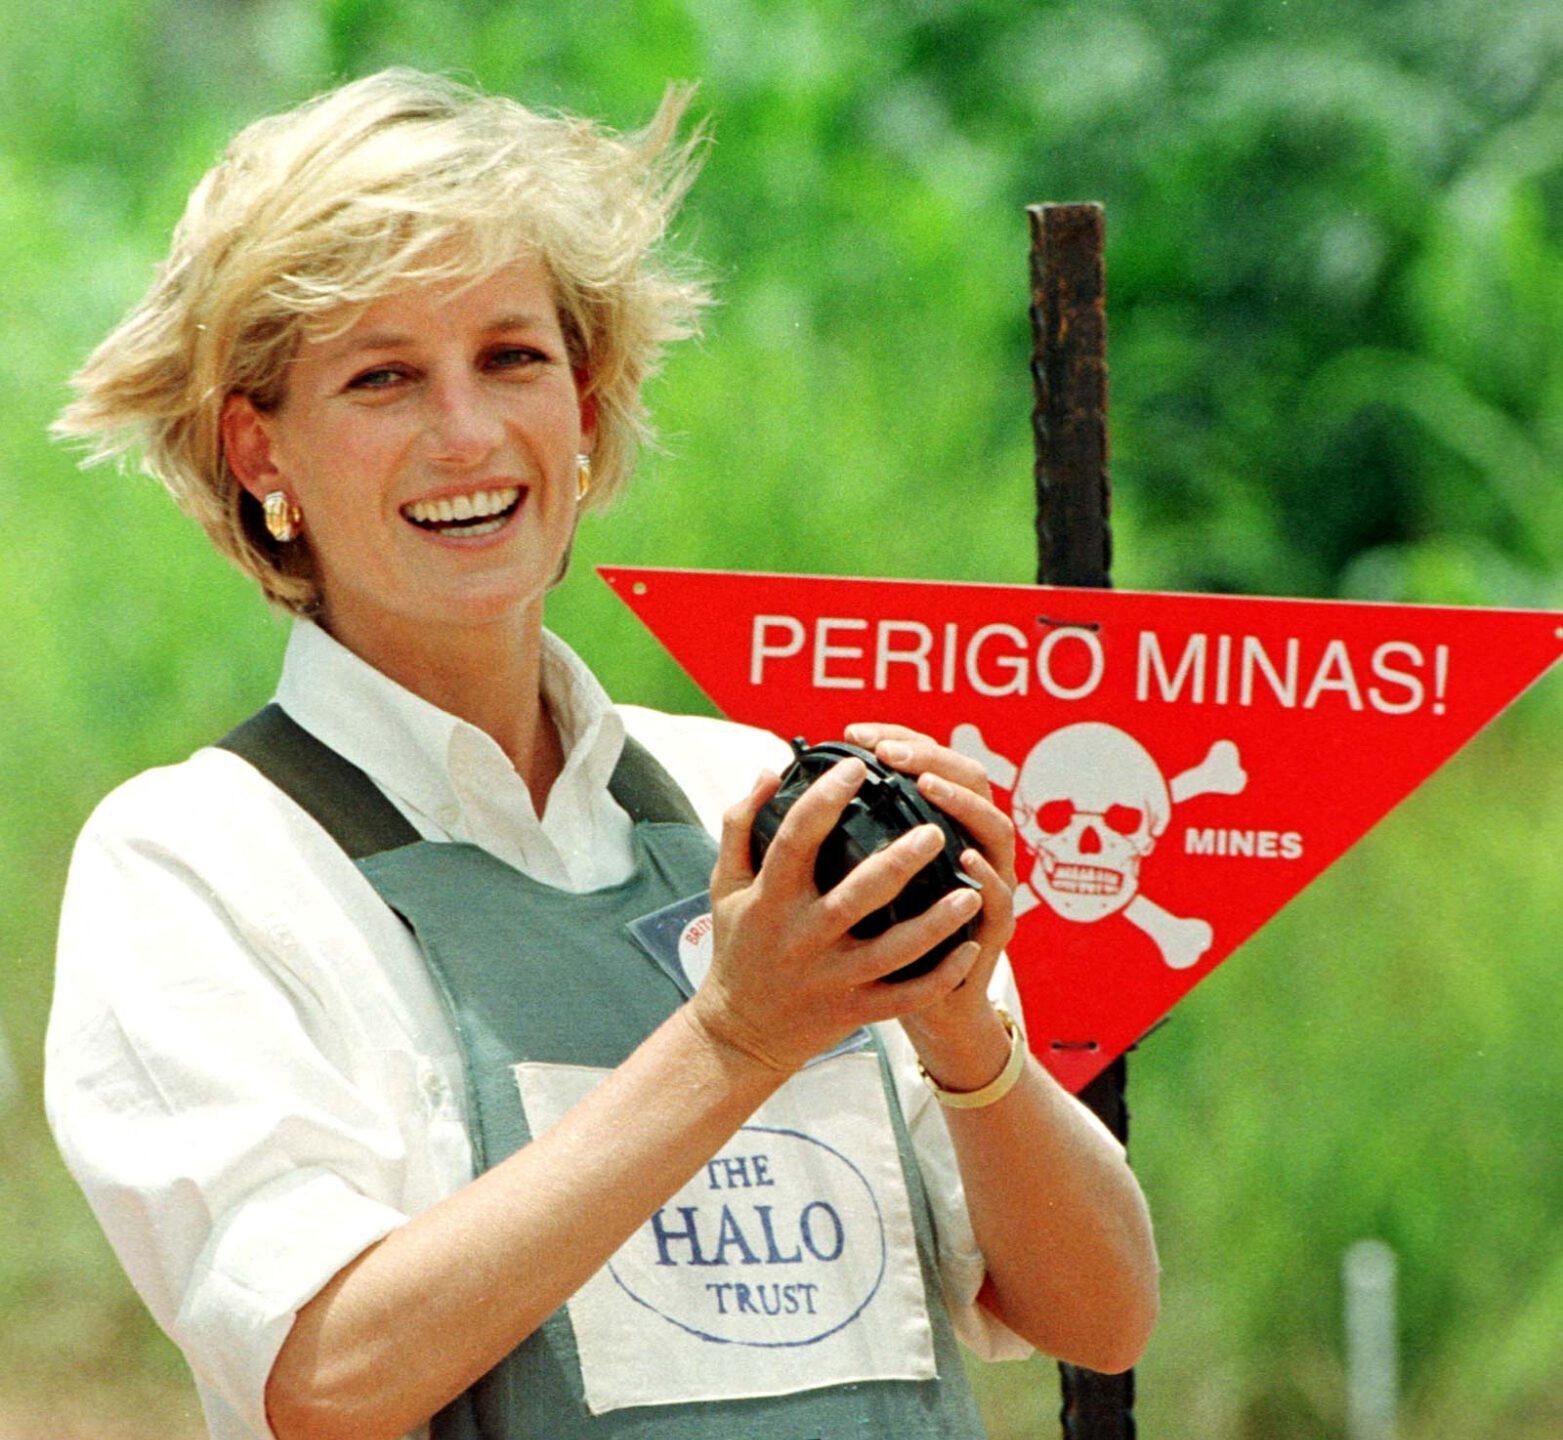 FILE PHOTO: Diana, Princess of Wales holds a landmine in one of the safety corridors of the landmine field in Huambo, Angola, January 15, 1997 during a visit to help a Red Cross campaign outlaw landmines worldwide. REUTERS/Juda Ngwenya